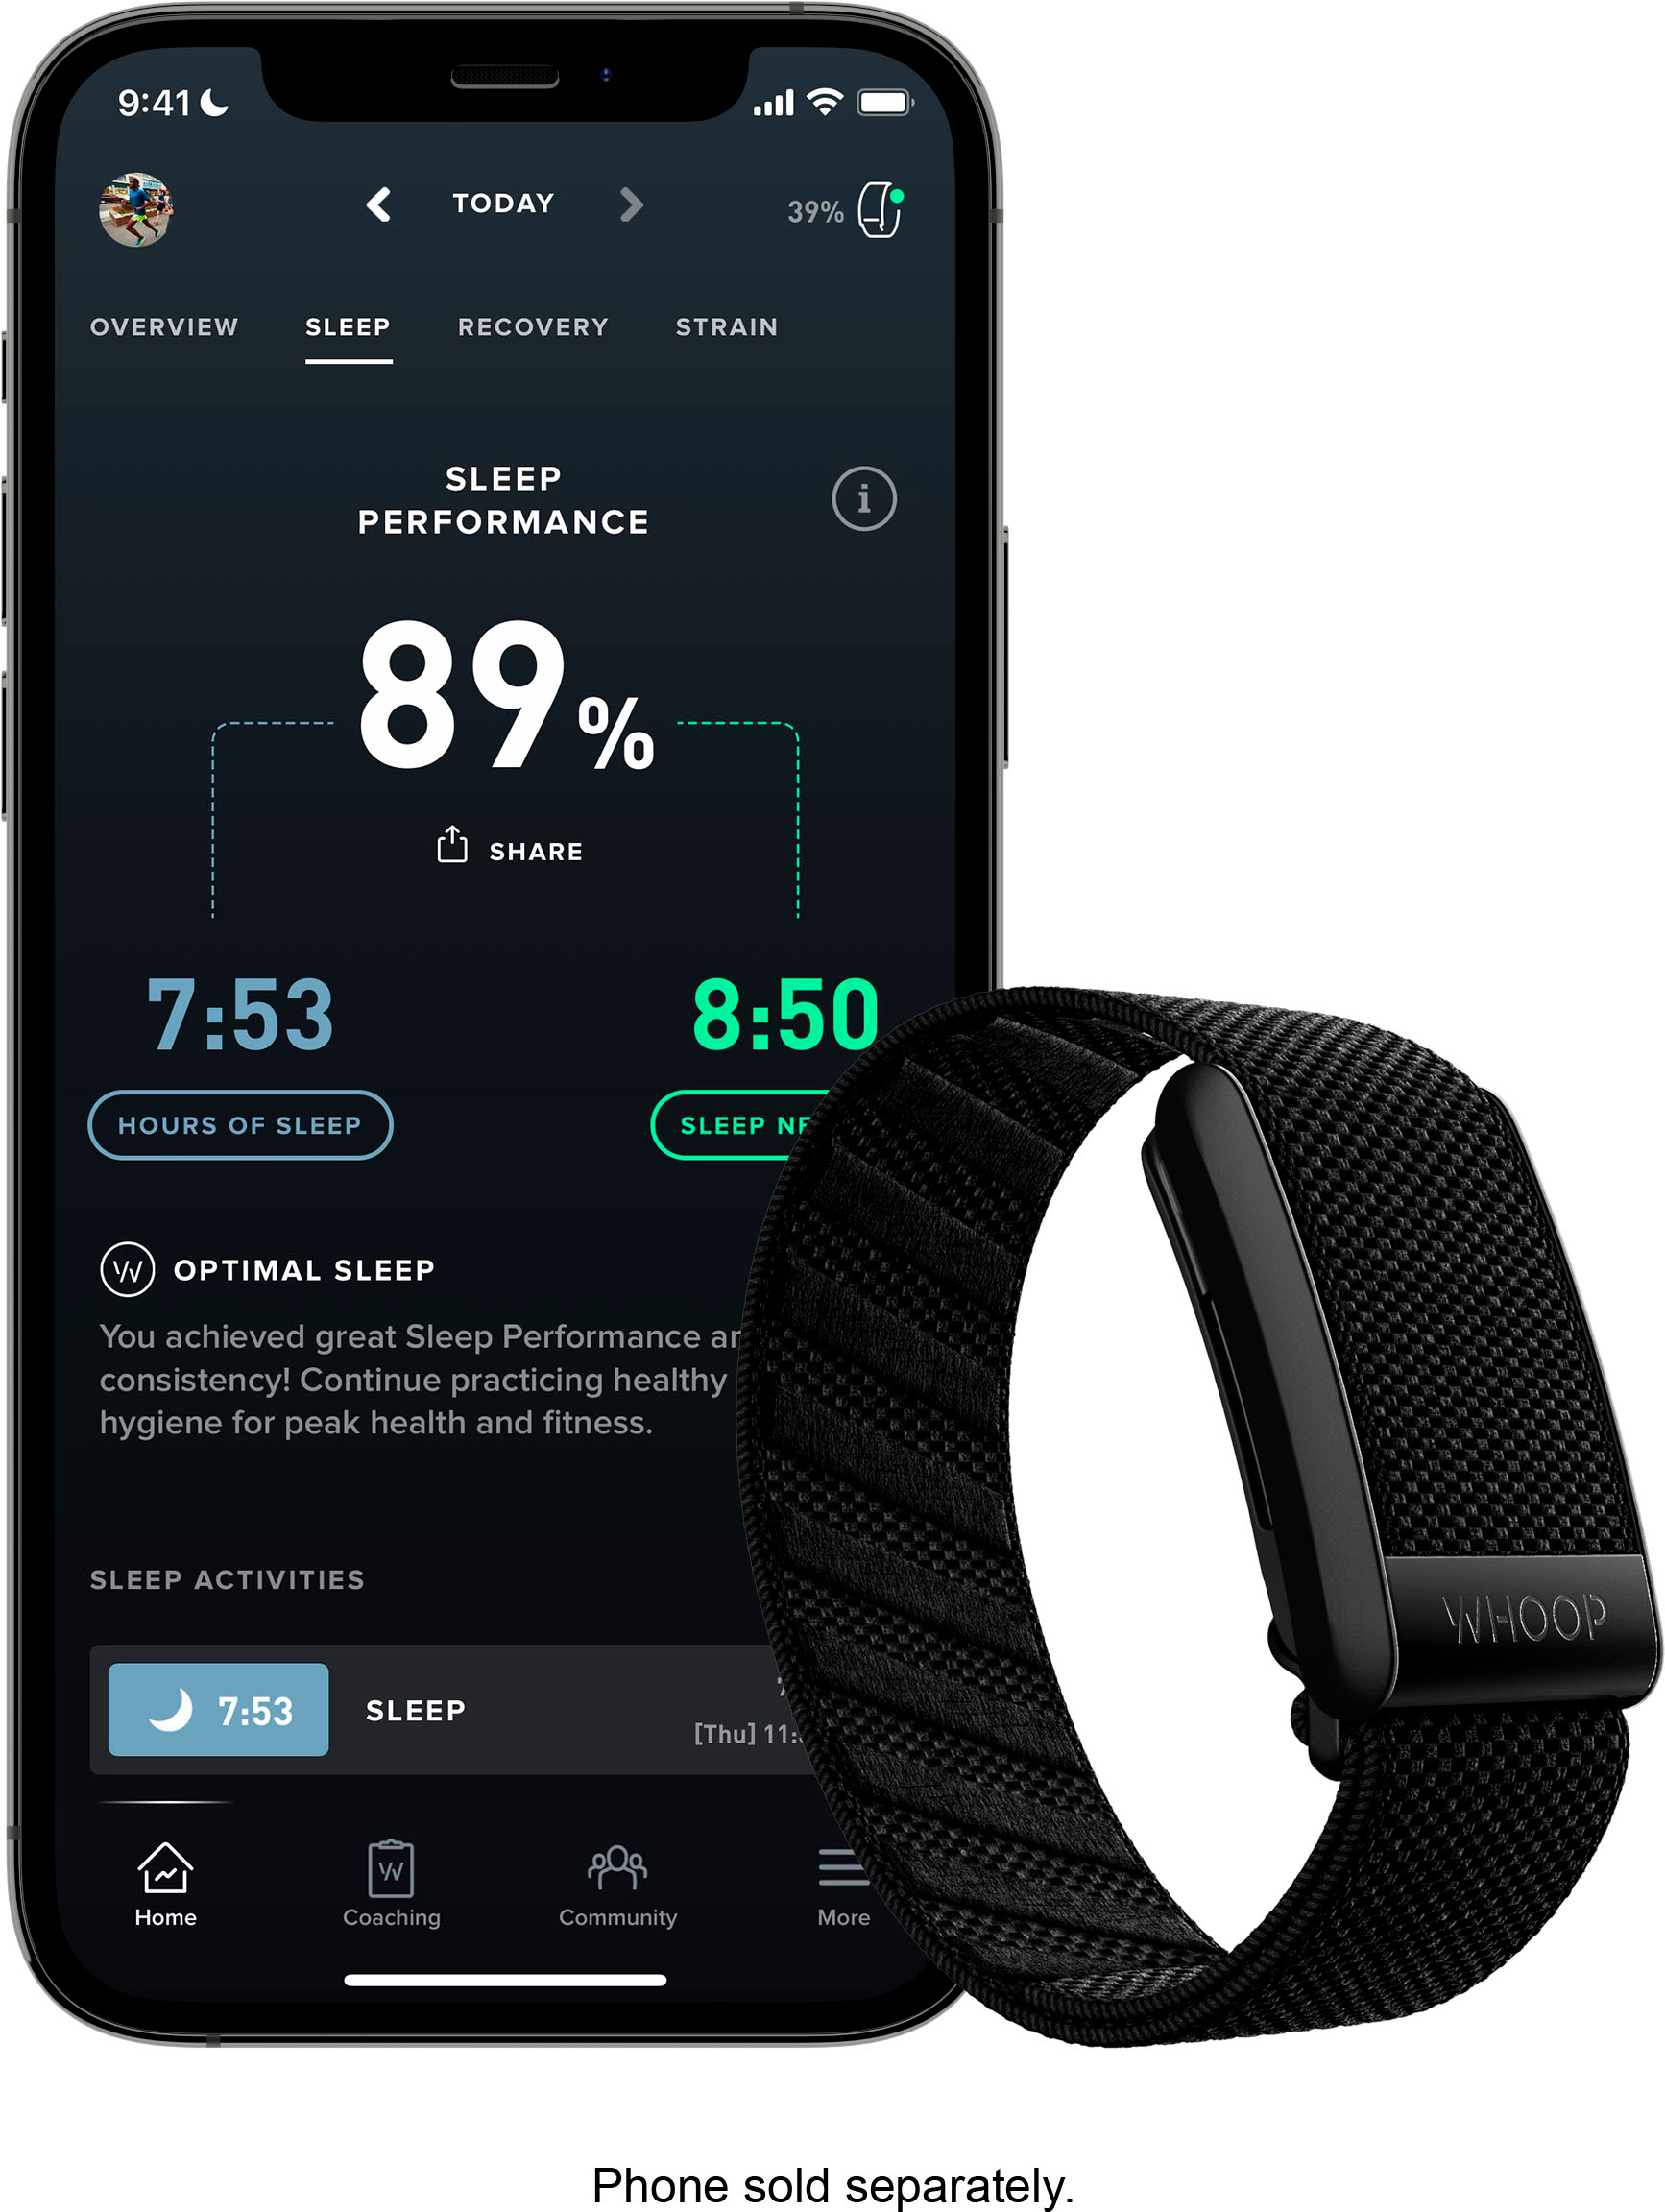 WHOOP 4.0 Health and Fitness Tracker with 12 Month Subscription Onyx  973-001-000 - Best Buy